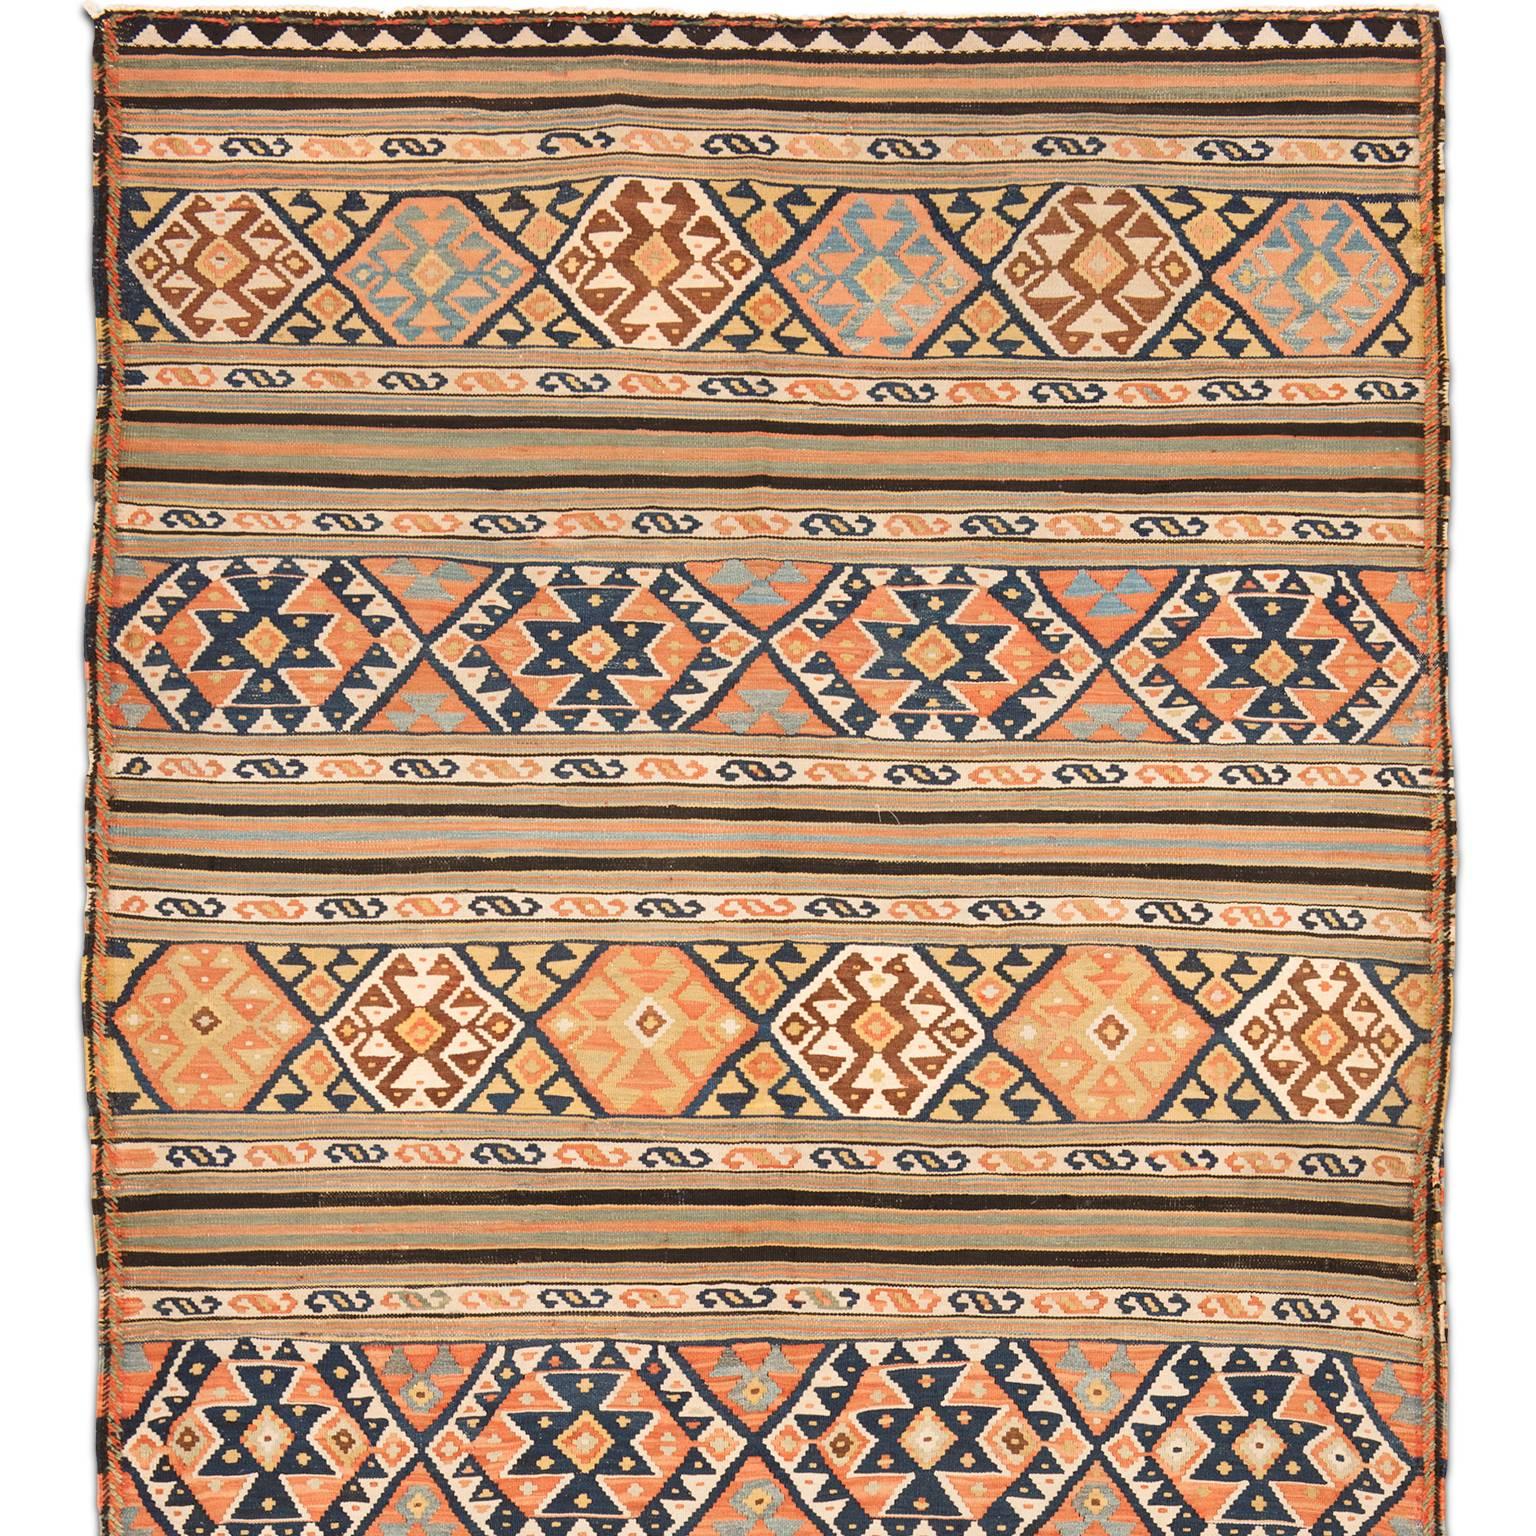 Antique Caucasian Kilim from the Azerbaijan area. Dates from the early 20th century, circa 1920. This finely woven Kilim has a dynamic banded design of repeated diamonds and triangles.